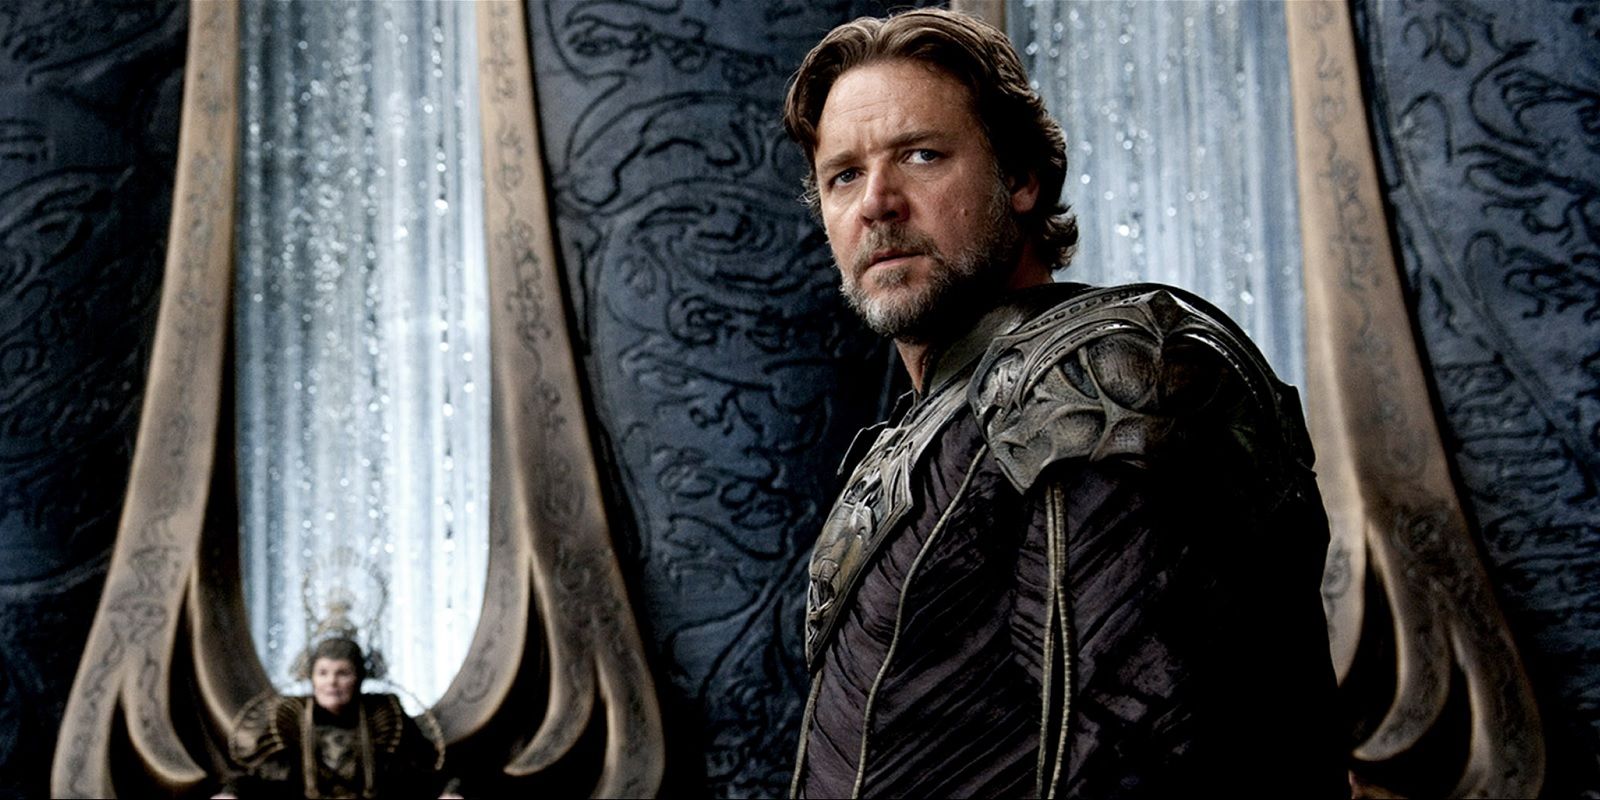 Jor-El with the Krypton council in Man of Steel